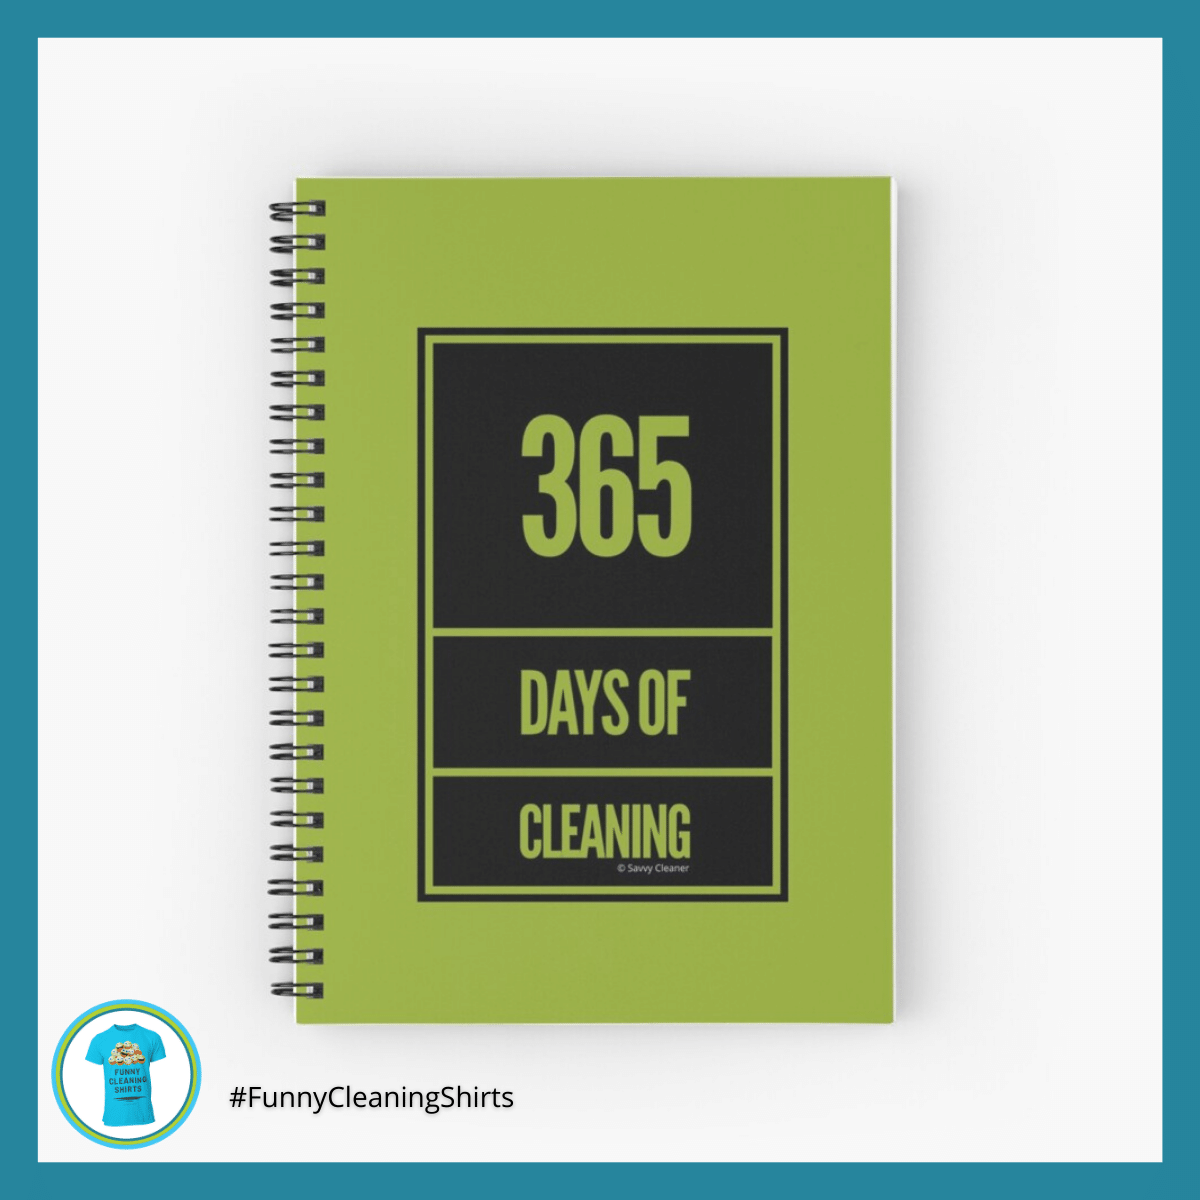 365 Days of Cleaning Savvy Cleaner Funny Cleaning Shirts Notebook